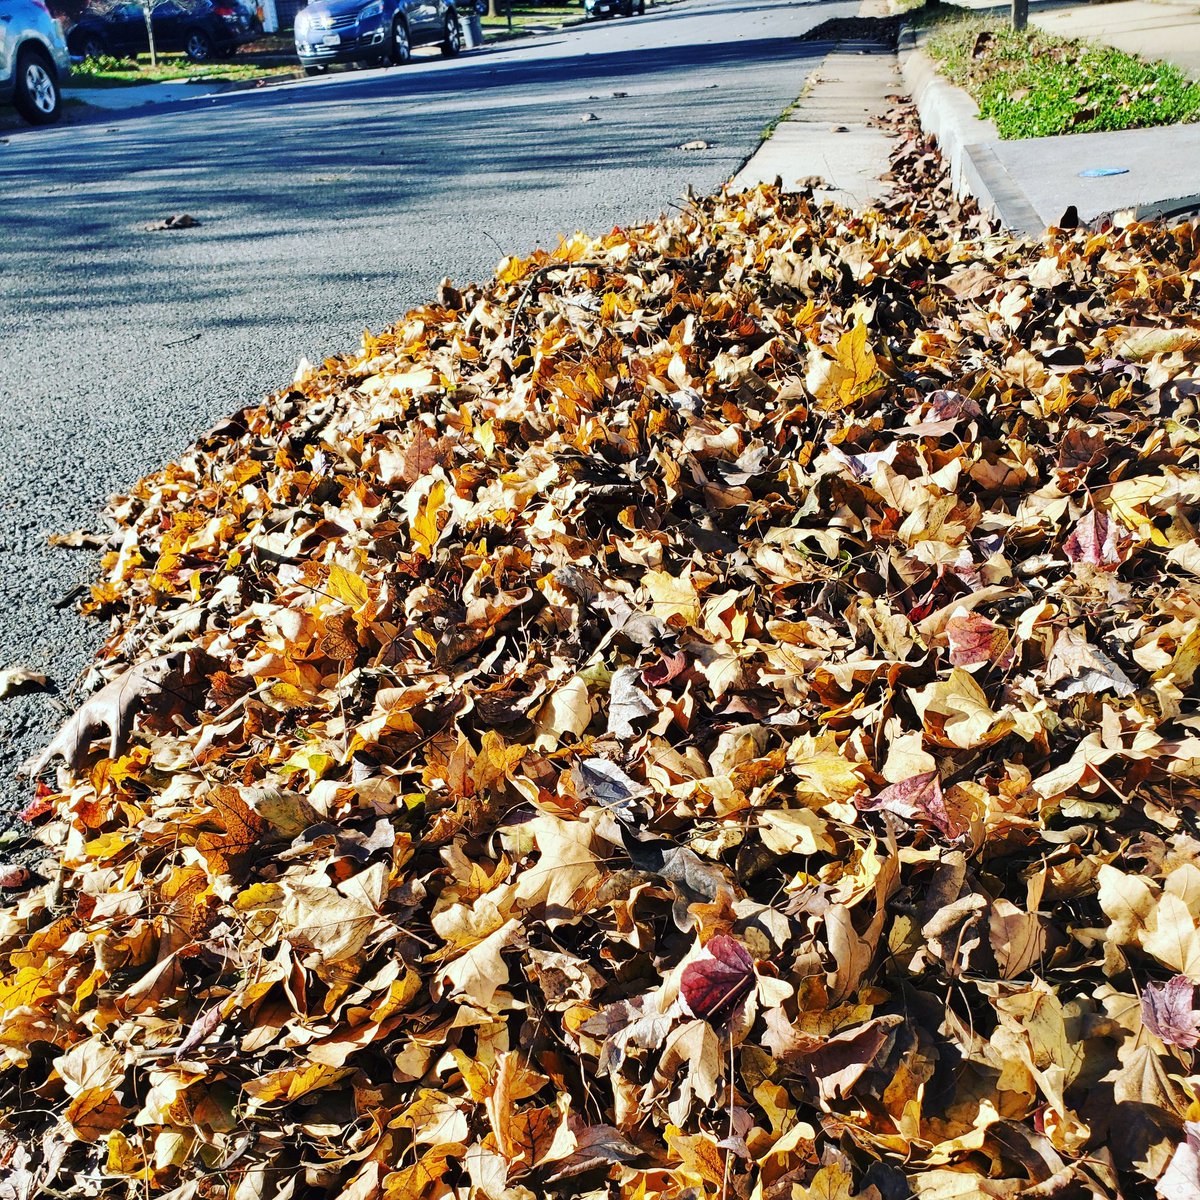 Have you ever wondered what it takes to collect fall leaves during bulk collection? We'll give you a live look during a ride along tomorrow at 12:15 p.m. Tune in to the Town's Facebook page. #facebooklive #bulkleafcollection #fallleafcollection #leesburgva #townofleesburg